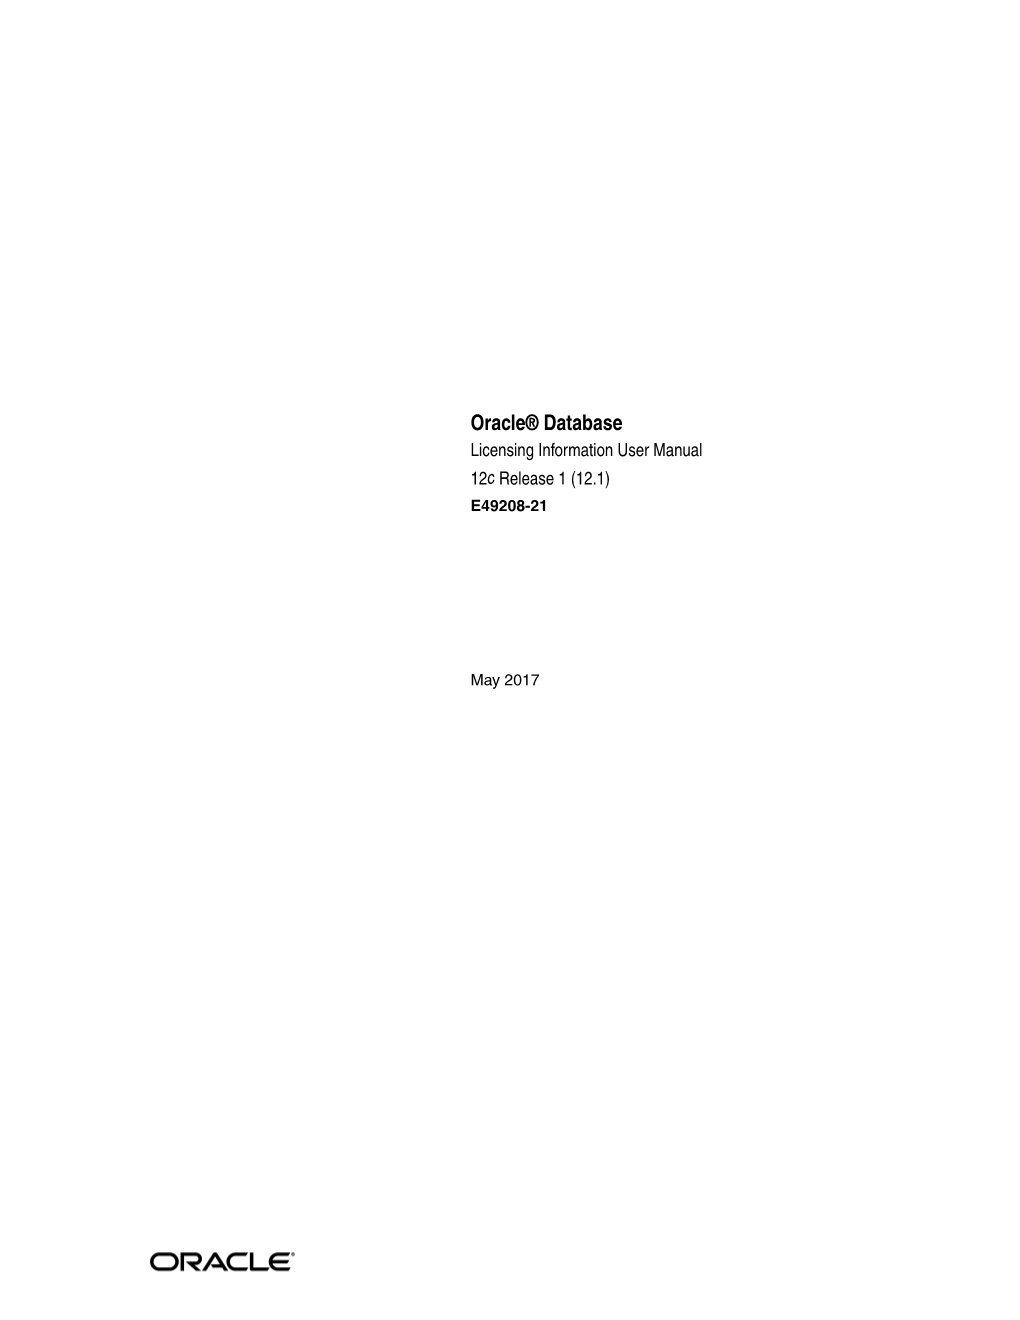 Oracle Database Licensing Information User Manual, 12C Release 1 (12.1) E49208-21